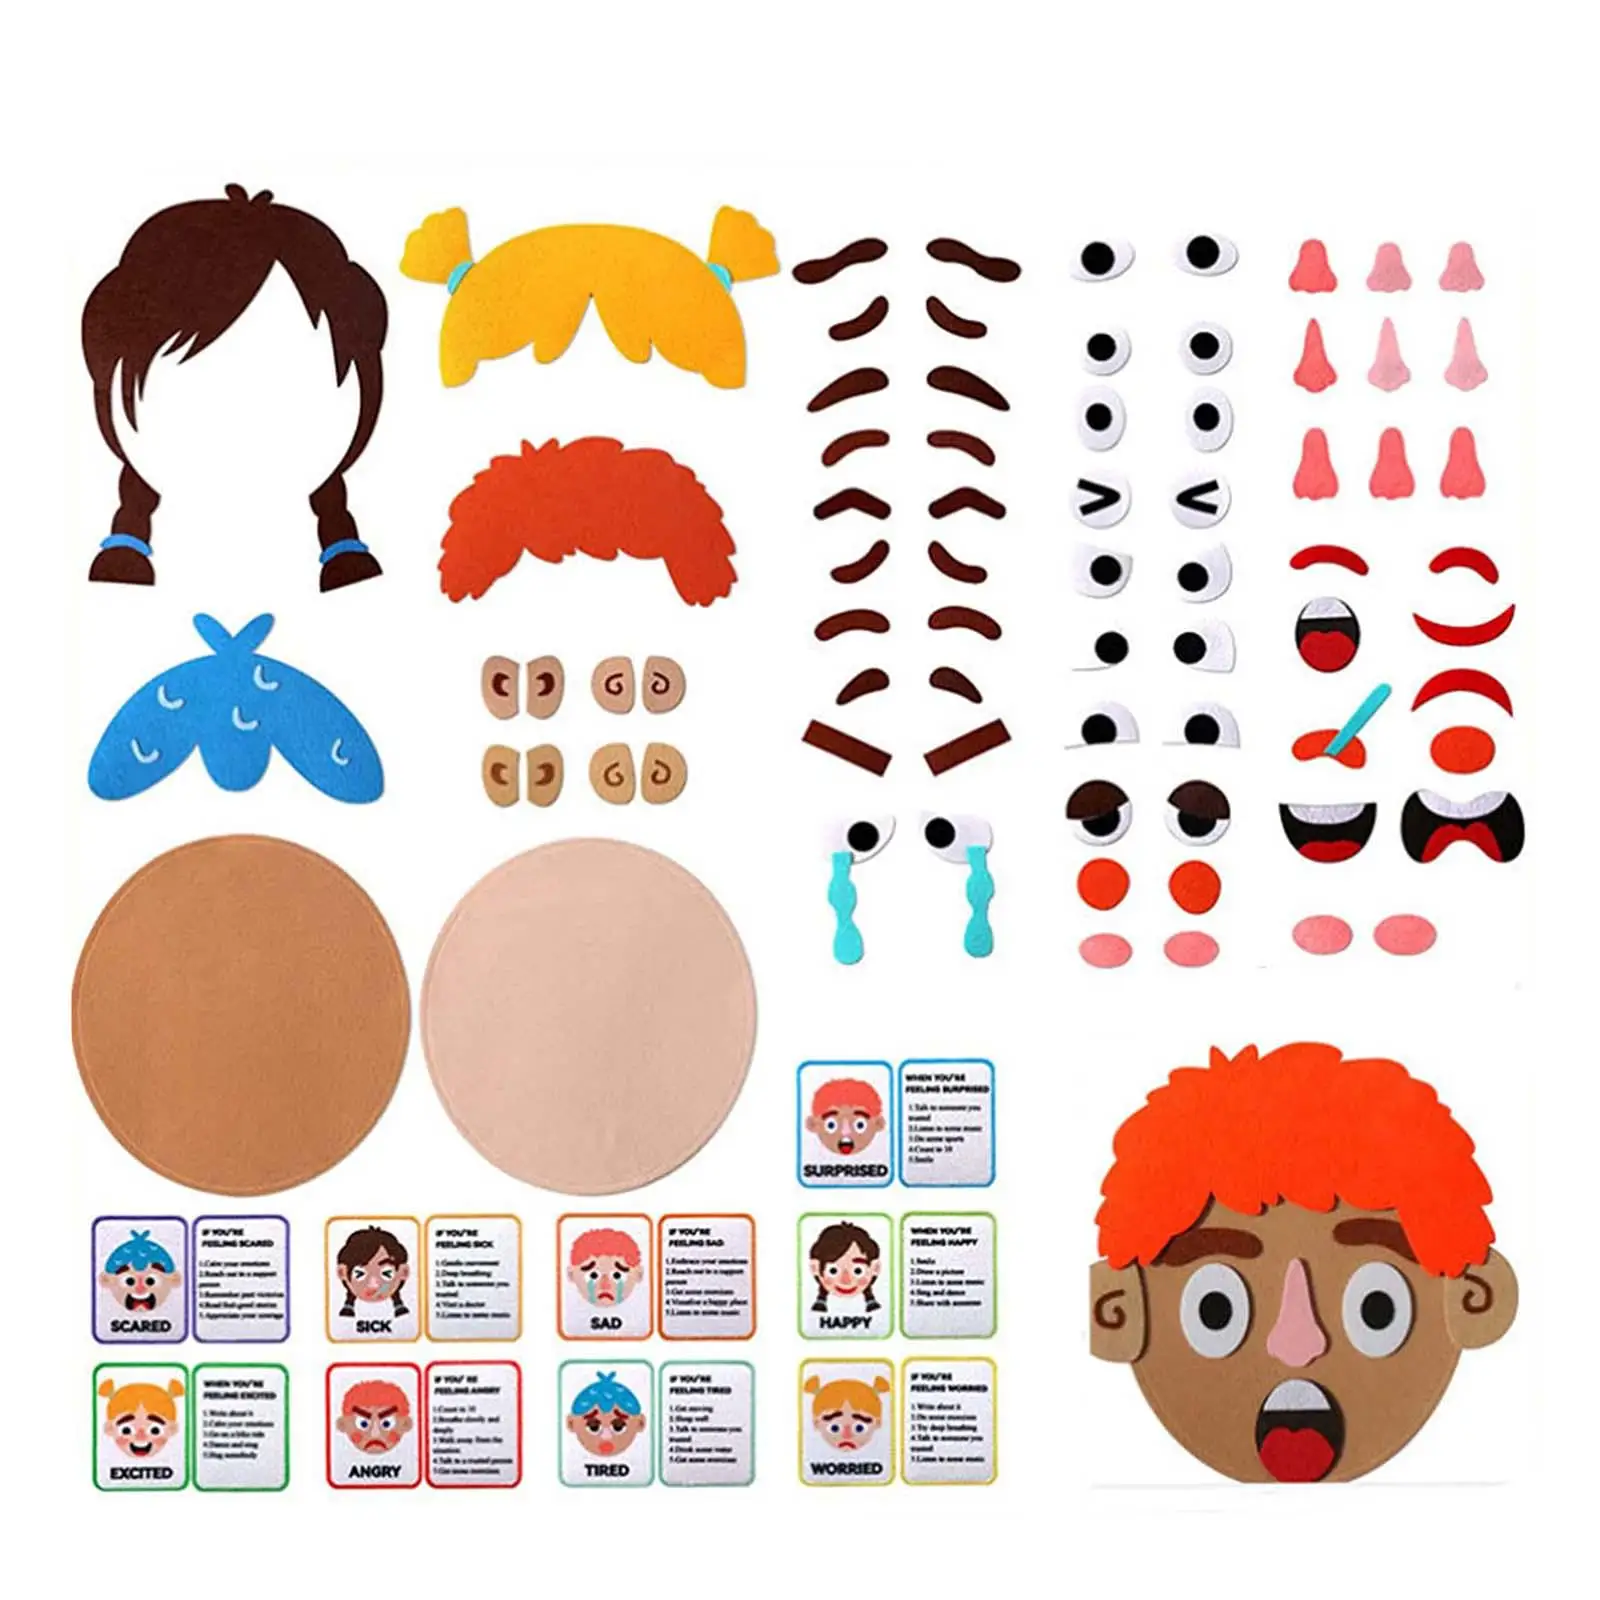 Kids Social Emotional Learning Learning Montessori Funny Faces Games Make A Funny Faces Stickers Games for Girls Boys Toddlers